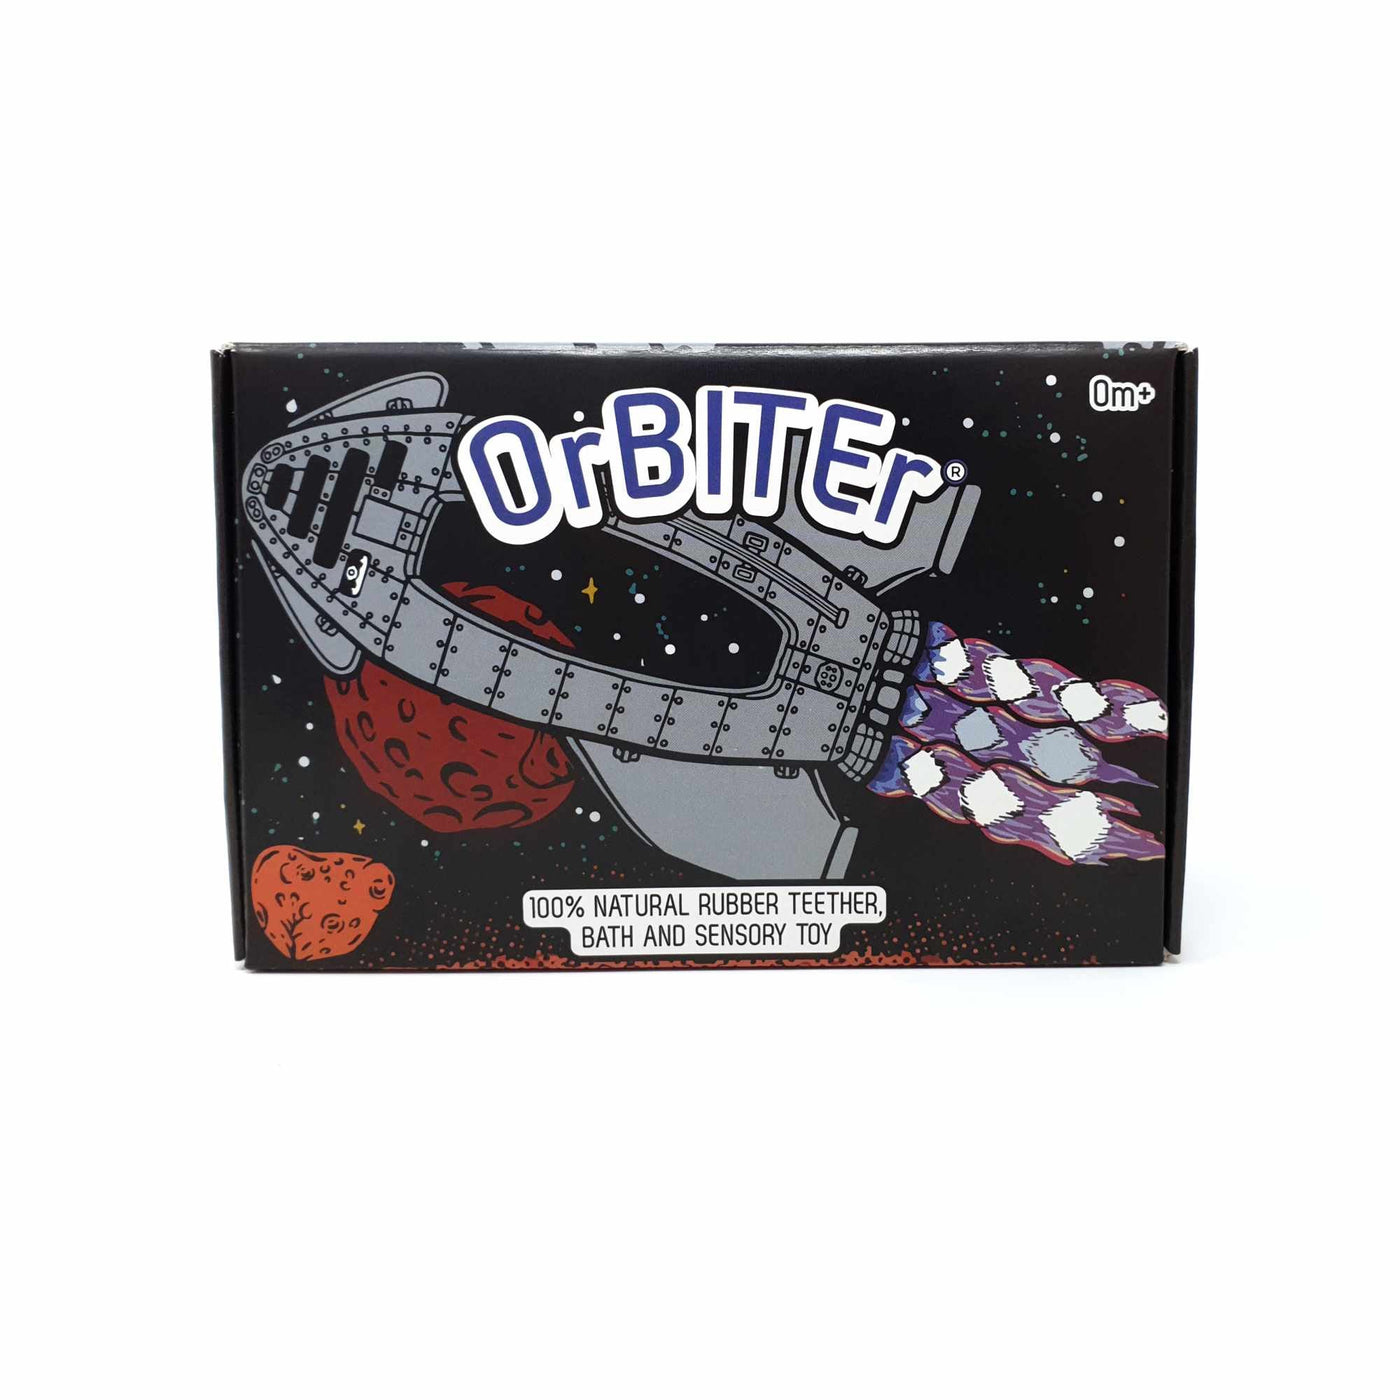 OrBITEr Rocket Shaped Natural Rubber Space Toy outside box by Thumble Baby Care